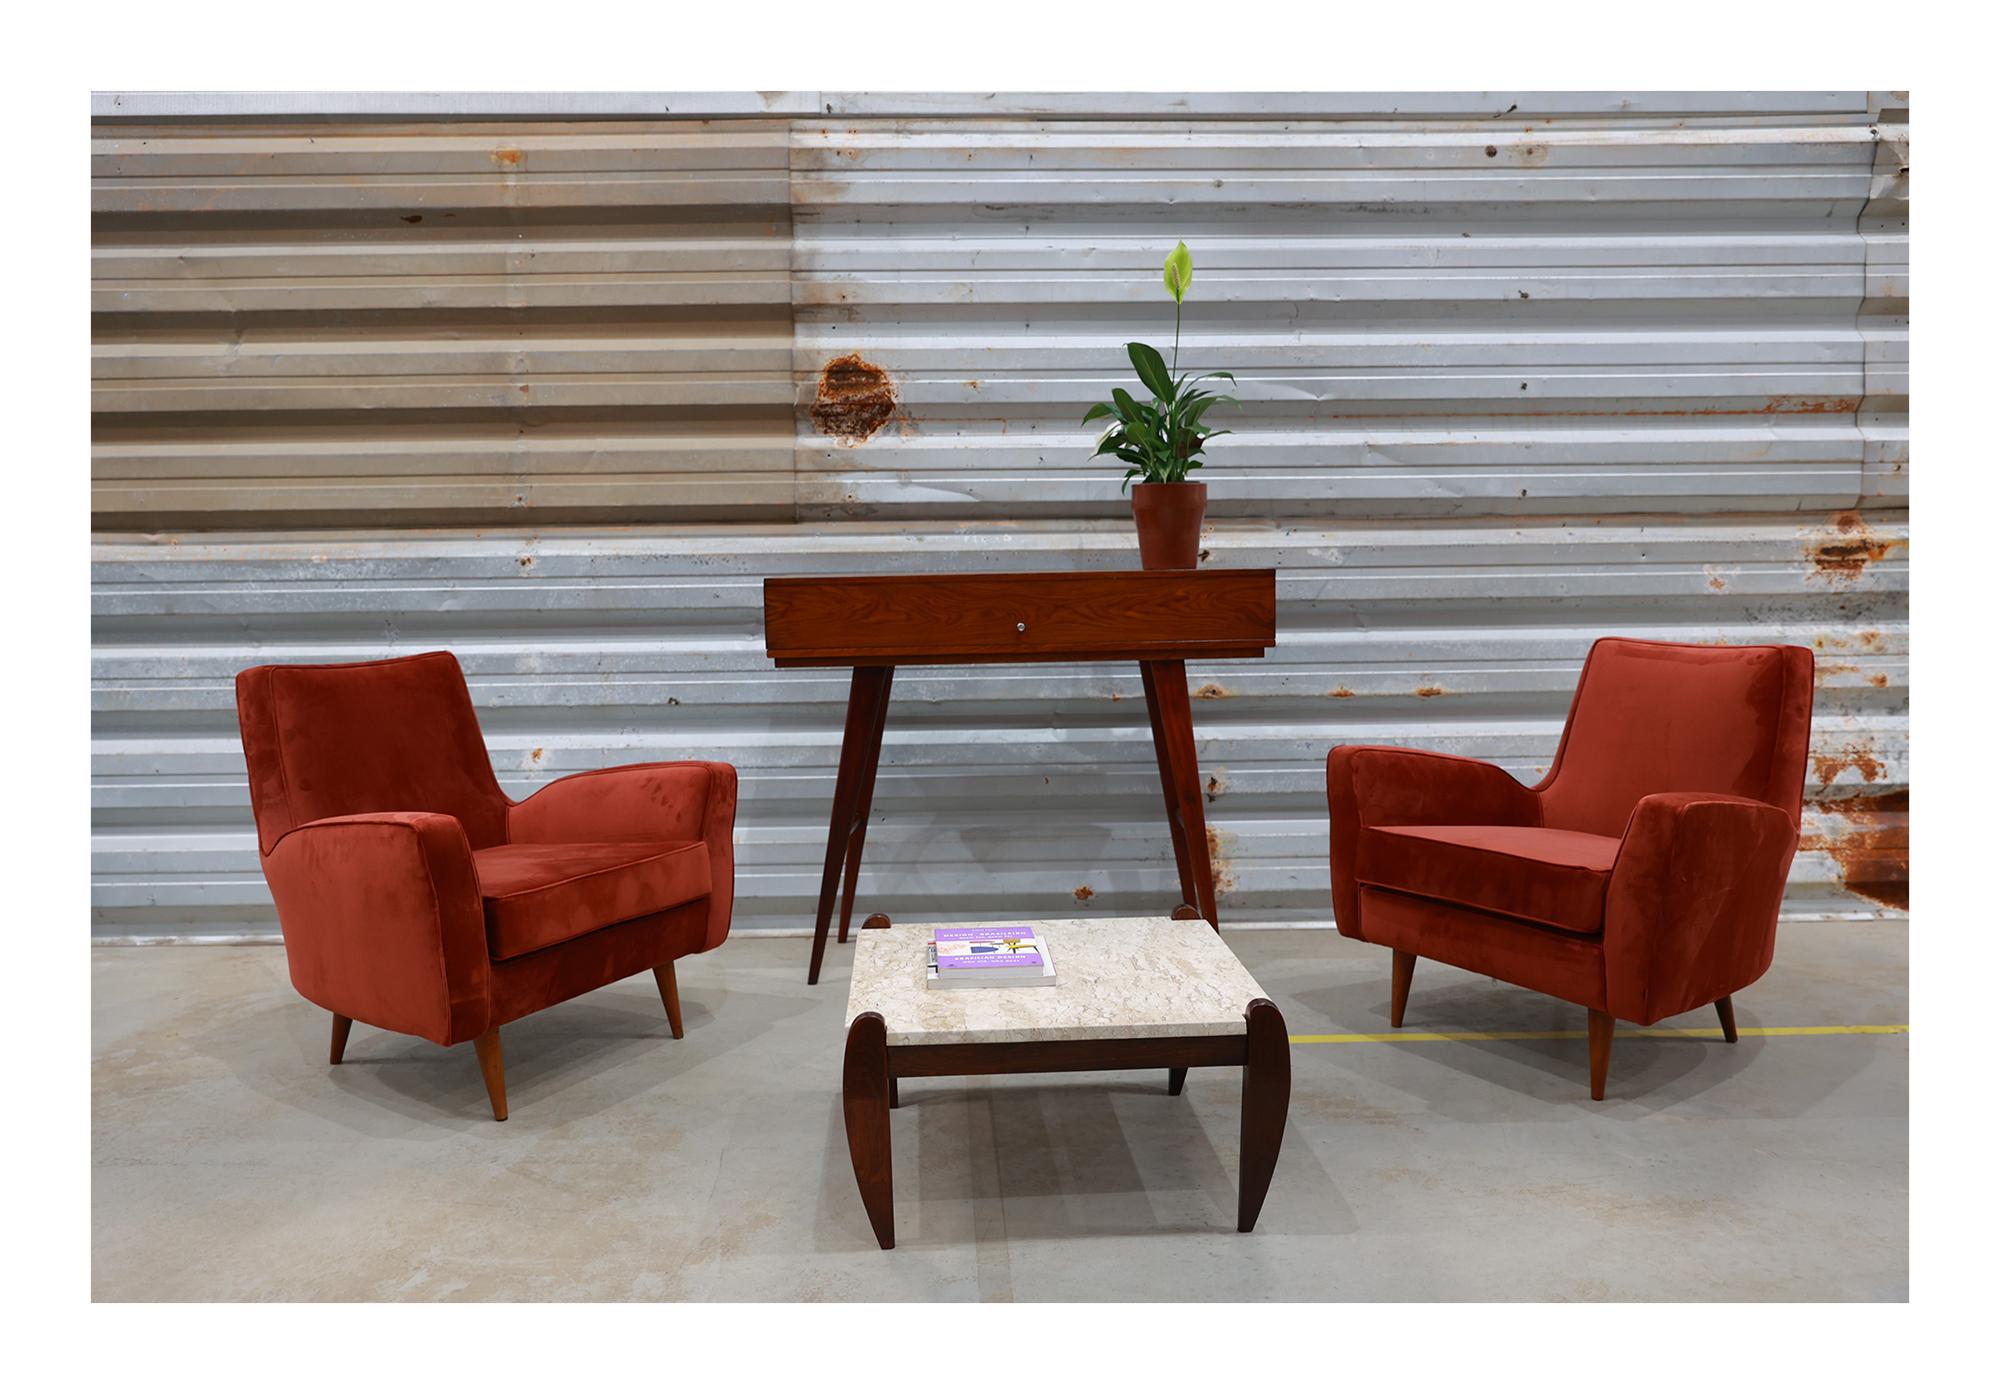 This pair of armchairs was designed by Forma (company owned by Carlo Hauner and Martin Eisler) in the 1950s. This design was very popular amongst the urban elites of Sao Paulo and Rio de Janeiro to furnish their homes. The structure of these chairs